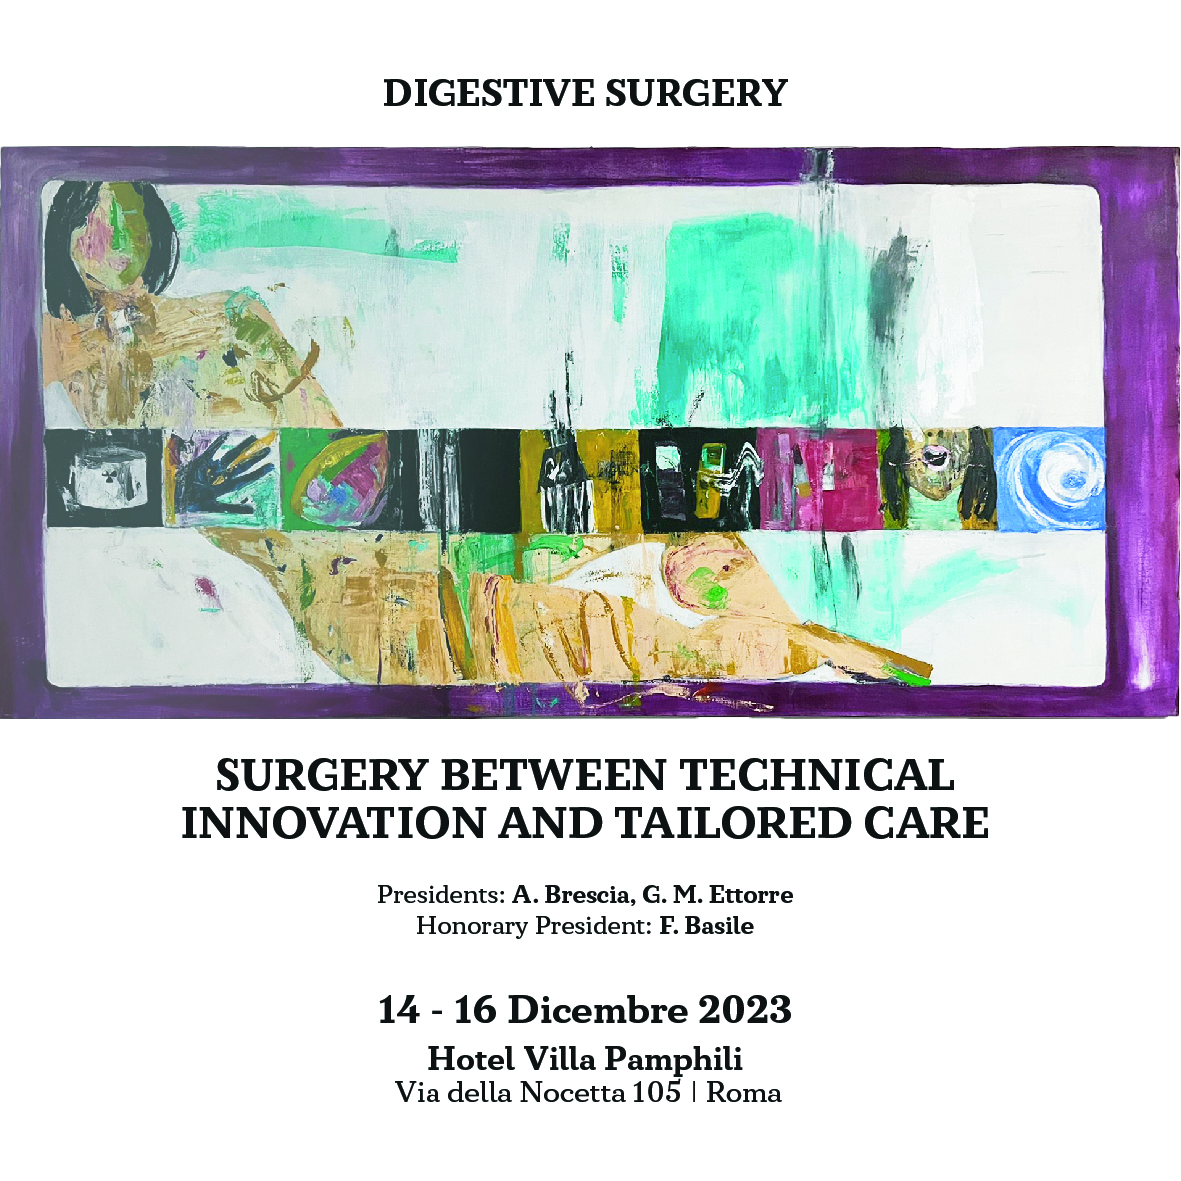 DIGESTIVE SURGERY: SURGERY BETWEEN TECHNICAL INNOVATION AND TAILORED CARE